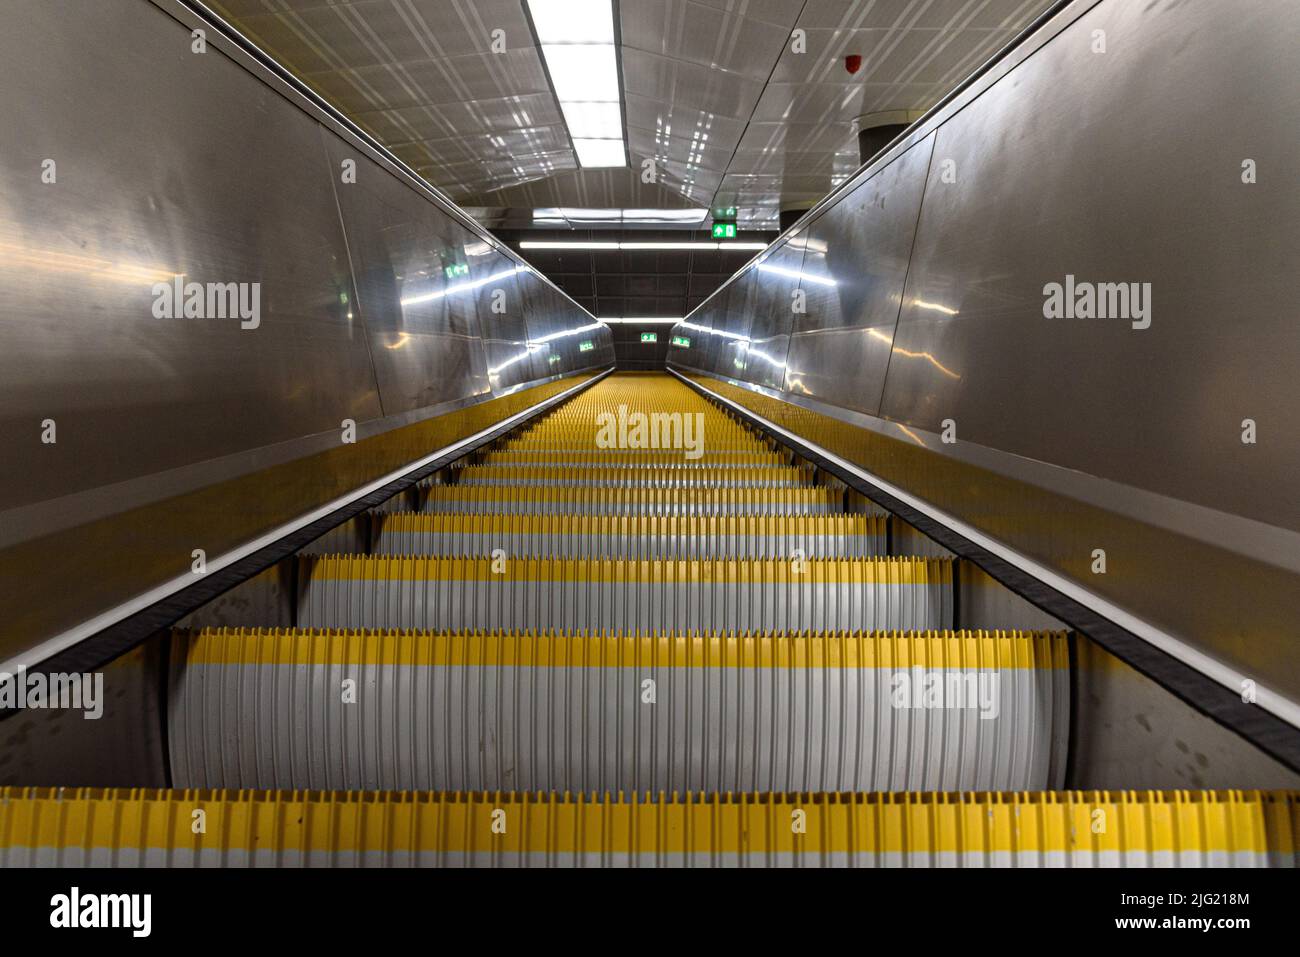 Looking up the escalator at the renovated Kalvin ter metro station on line 3 in Budapest, Hungary Stock Photo